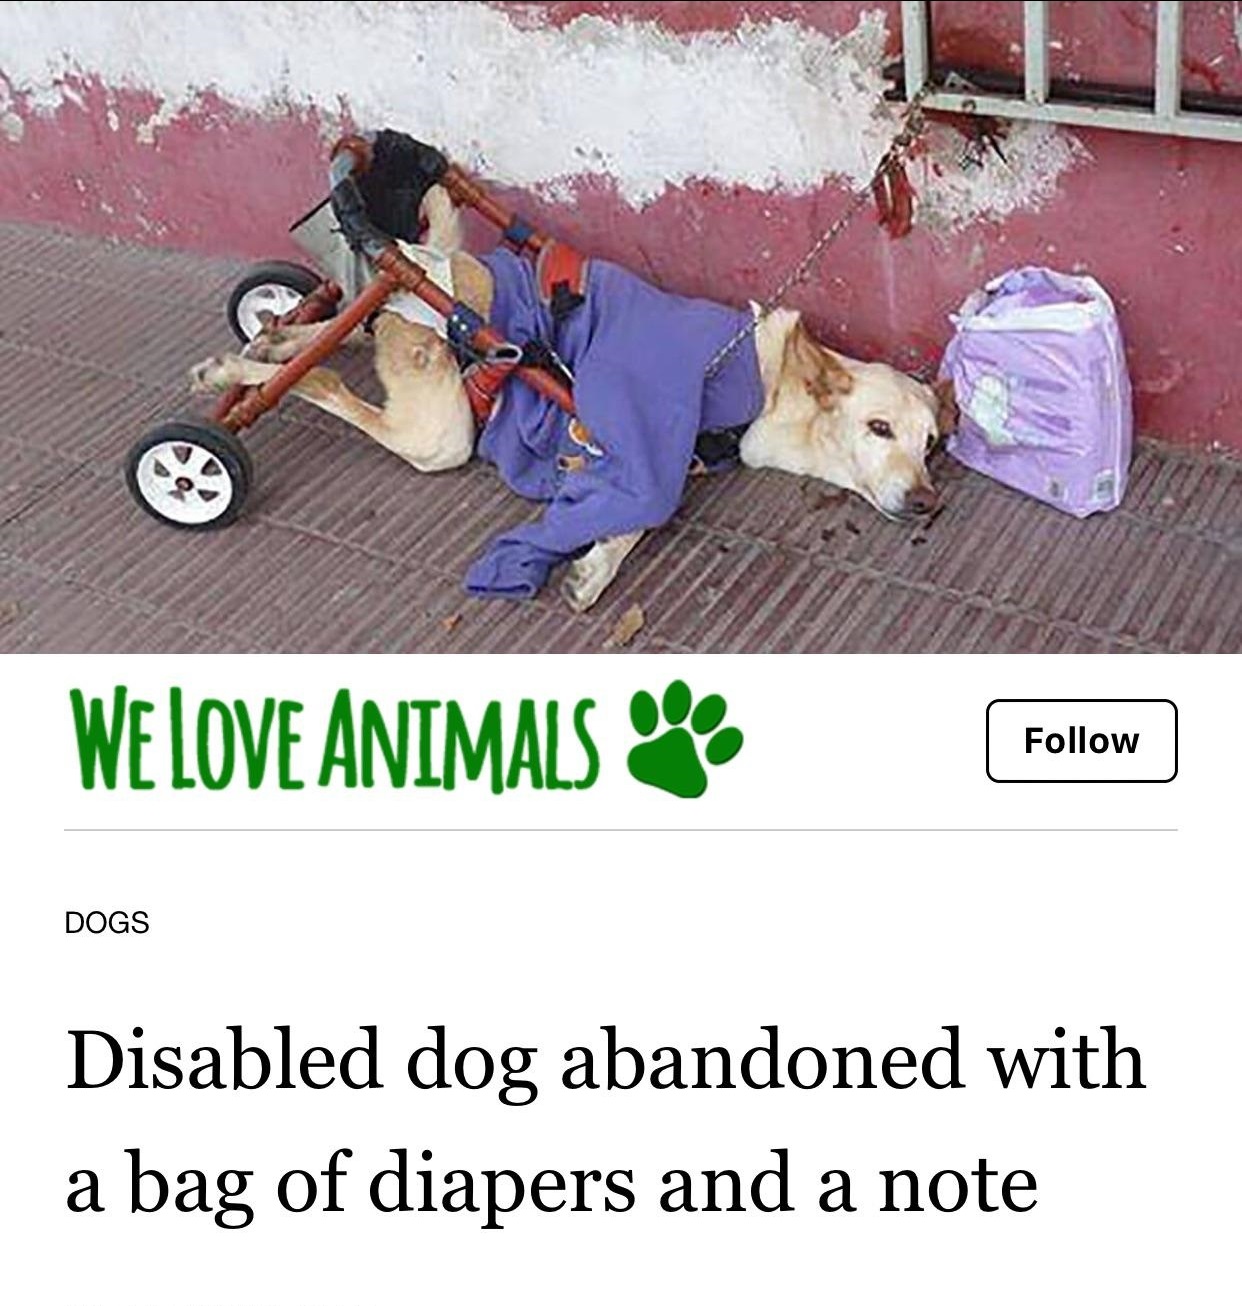 paralyzed dog - We Love Animals Dogs Disabled dog abandoned with a bag of diapers and a note